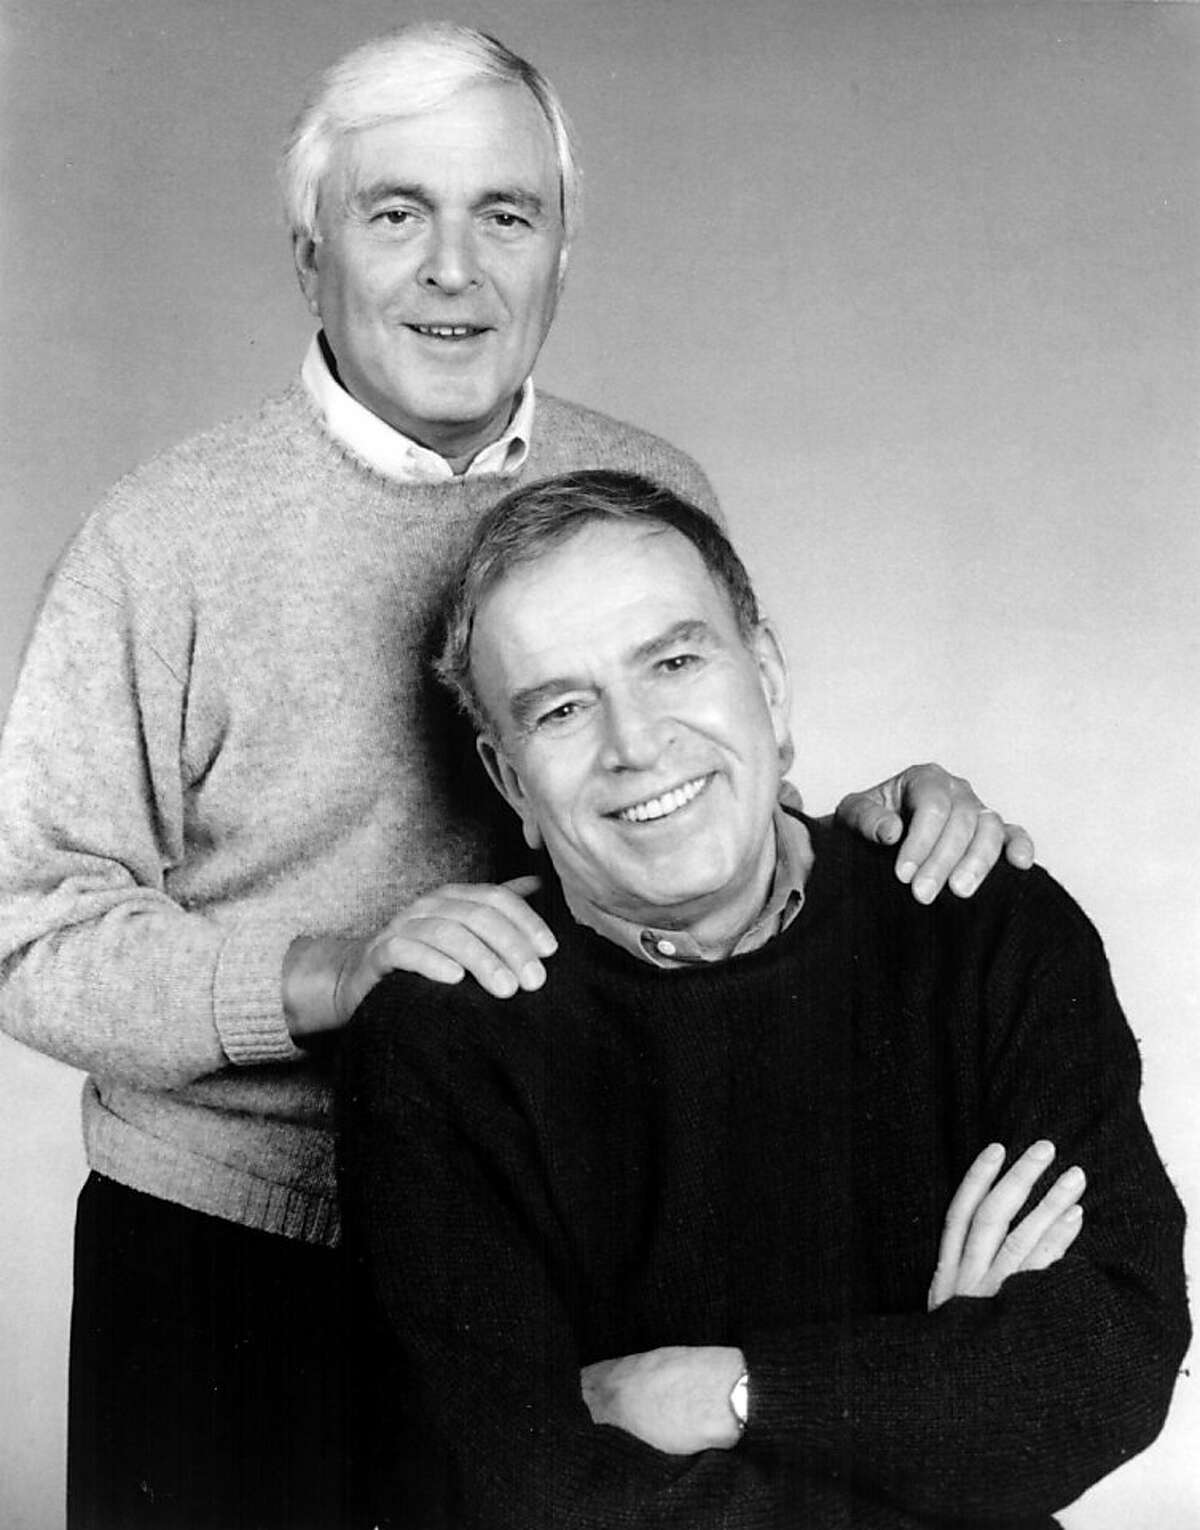 Fred Ebb, seated, died in 2004, but his longtime writing partner, John Kander, completed the score for their final musical, "The Scottsboro Boys." Composer John Kander and lyricist Fred Ebb. The Scottsboro Boys, with music and lyrics by Kander and Ebb and book by David Thompson, will run Aprill 29 - June 10, 2012 at The Old Globe. Photo courtesy of The Old Globe.